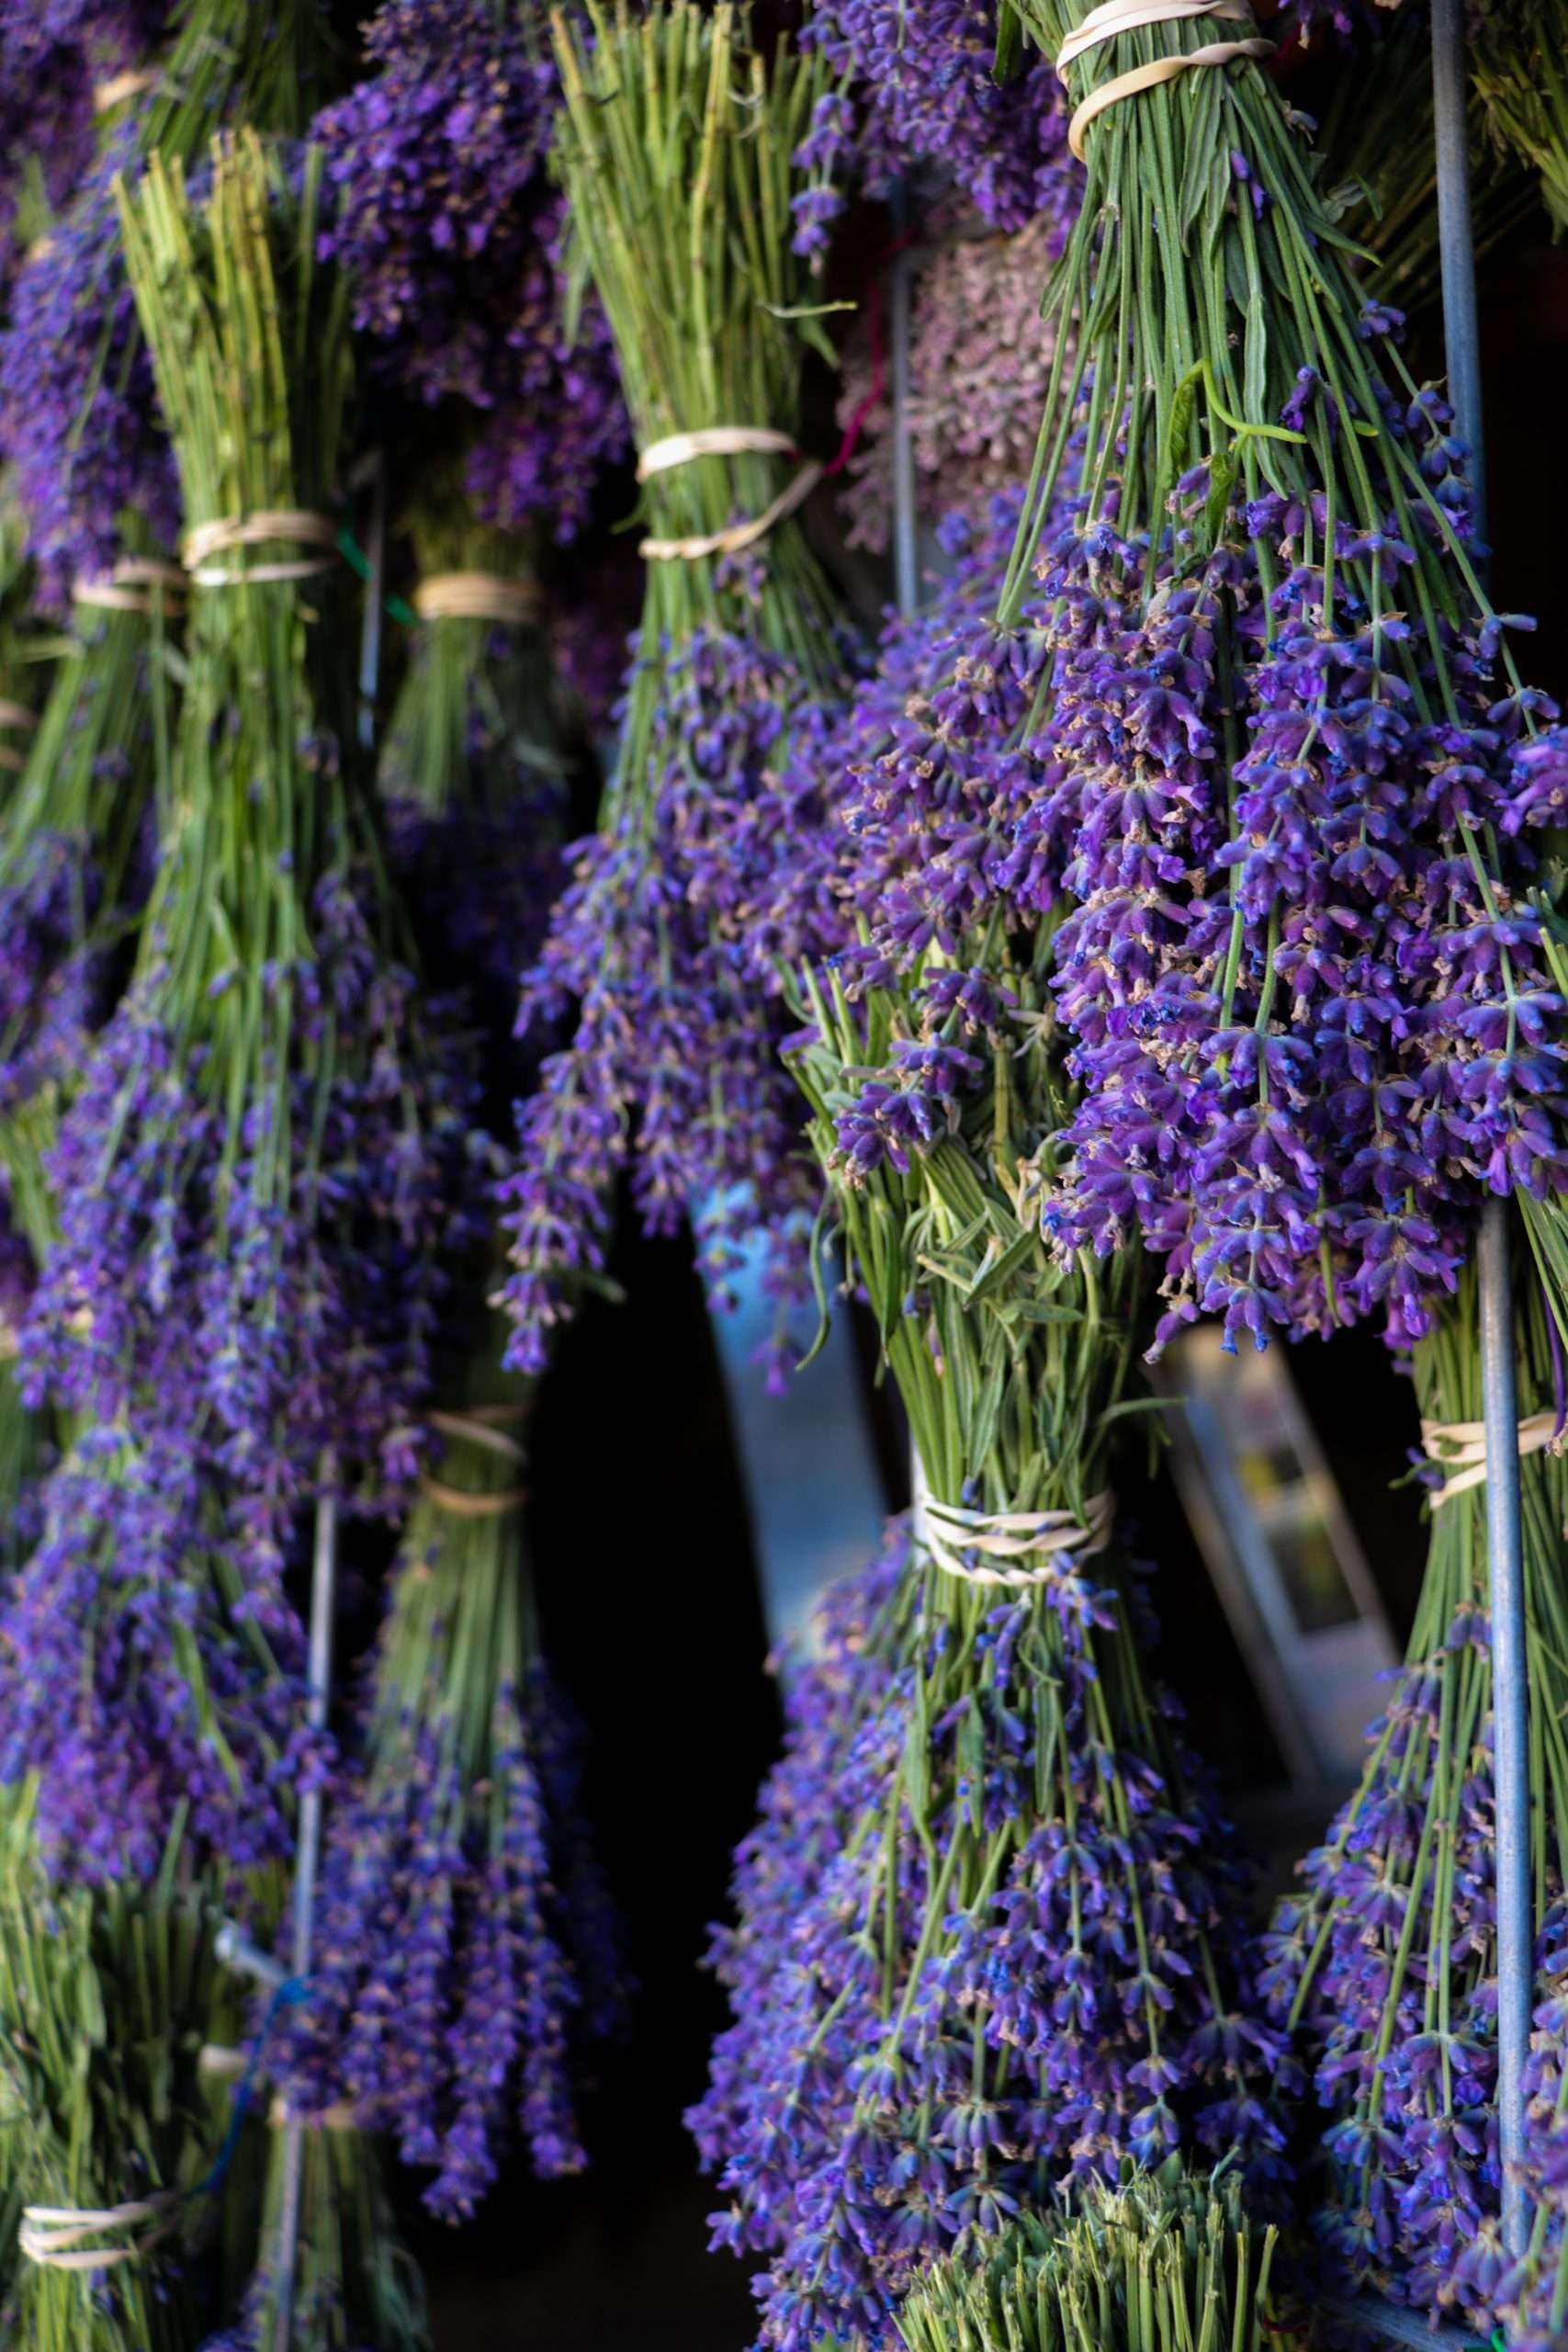 Indulge in the Colorado Lavender Festival in Palisade, CO